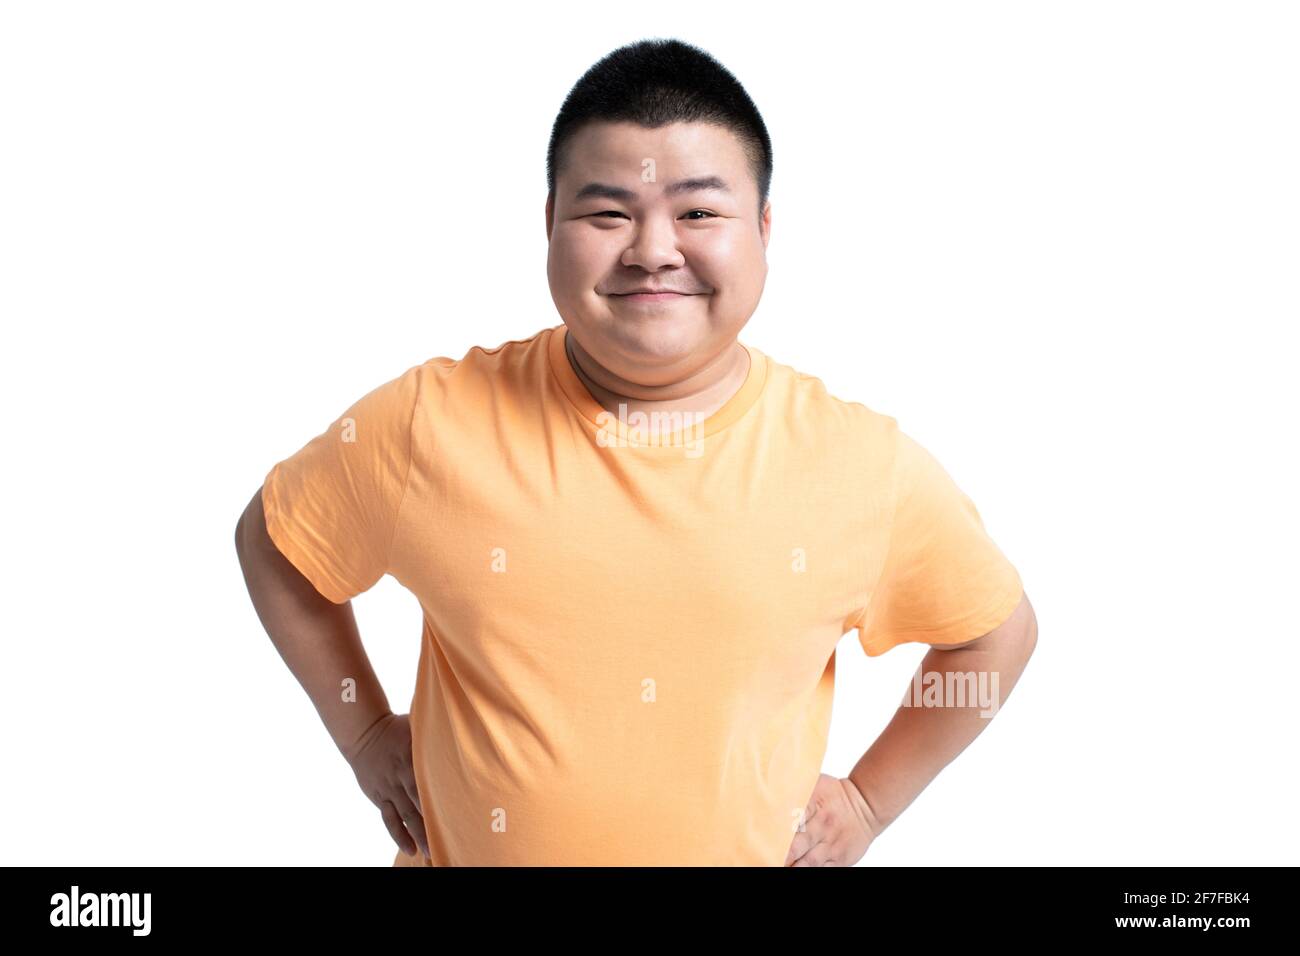 Happy young man Stock Photo